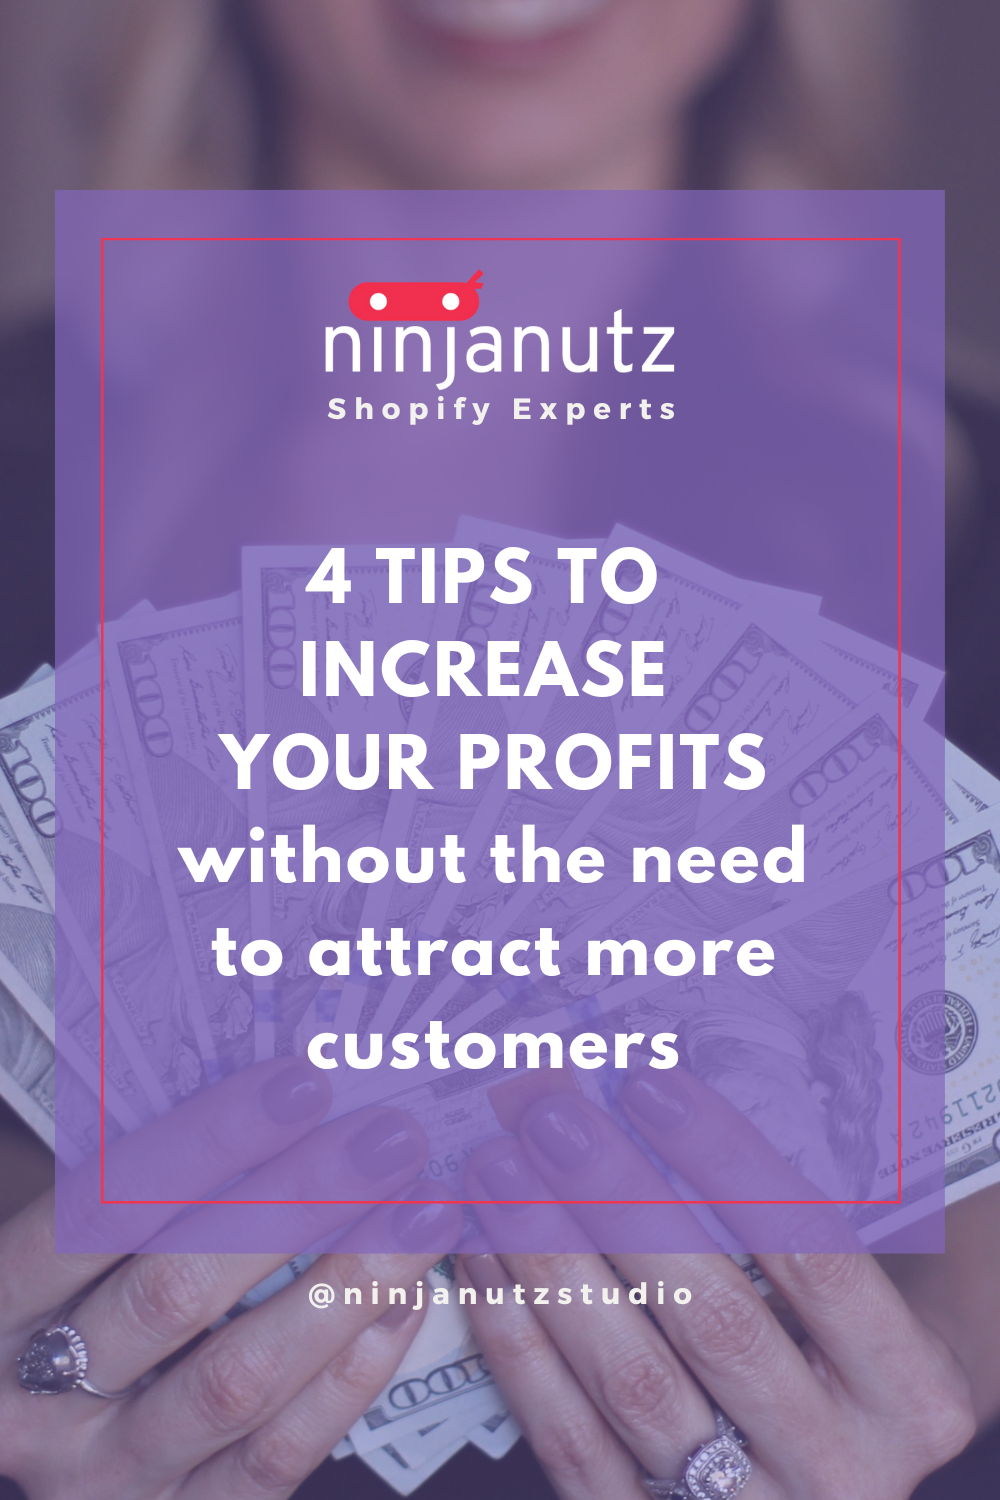 4 tips to increase your profits without the need to attract more customers NinjaNutz®